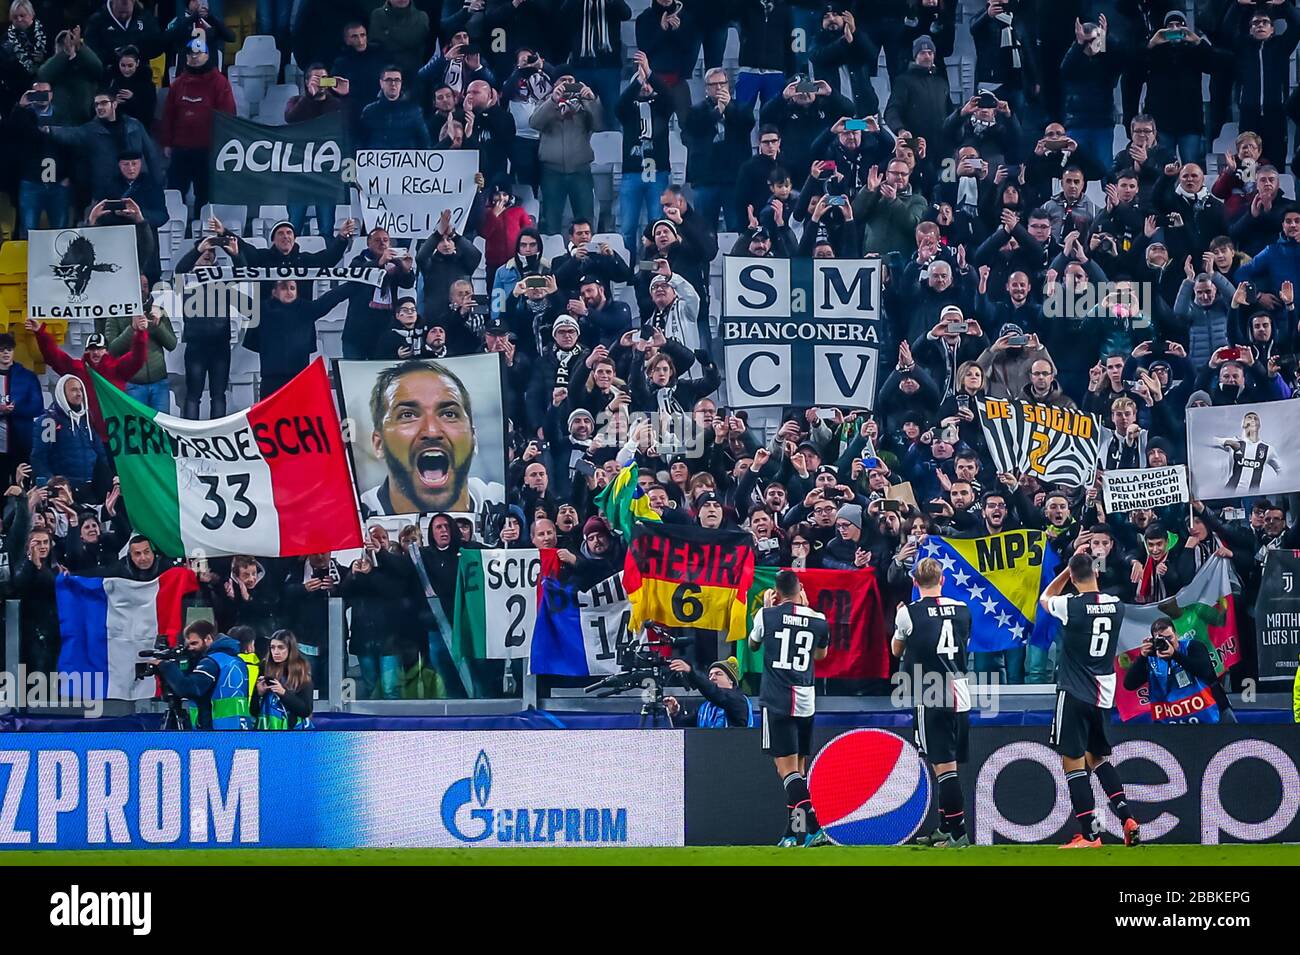 Juventus supporters and flag during soccer season 2019/20 symbolic images - Photo credit Fabrizio Carabelli /LM/ Stock Photo